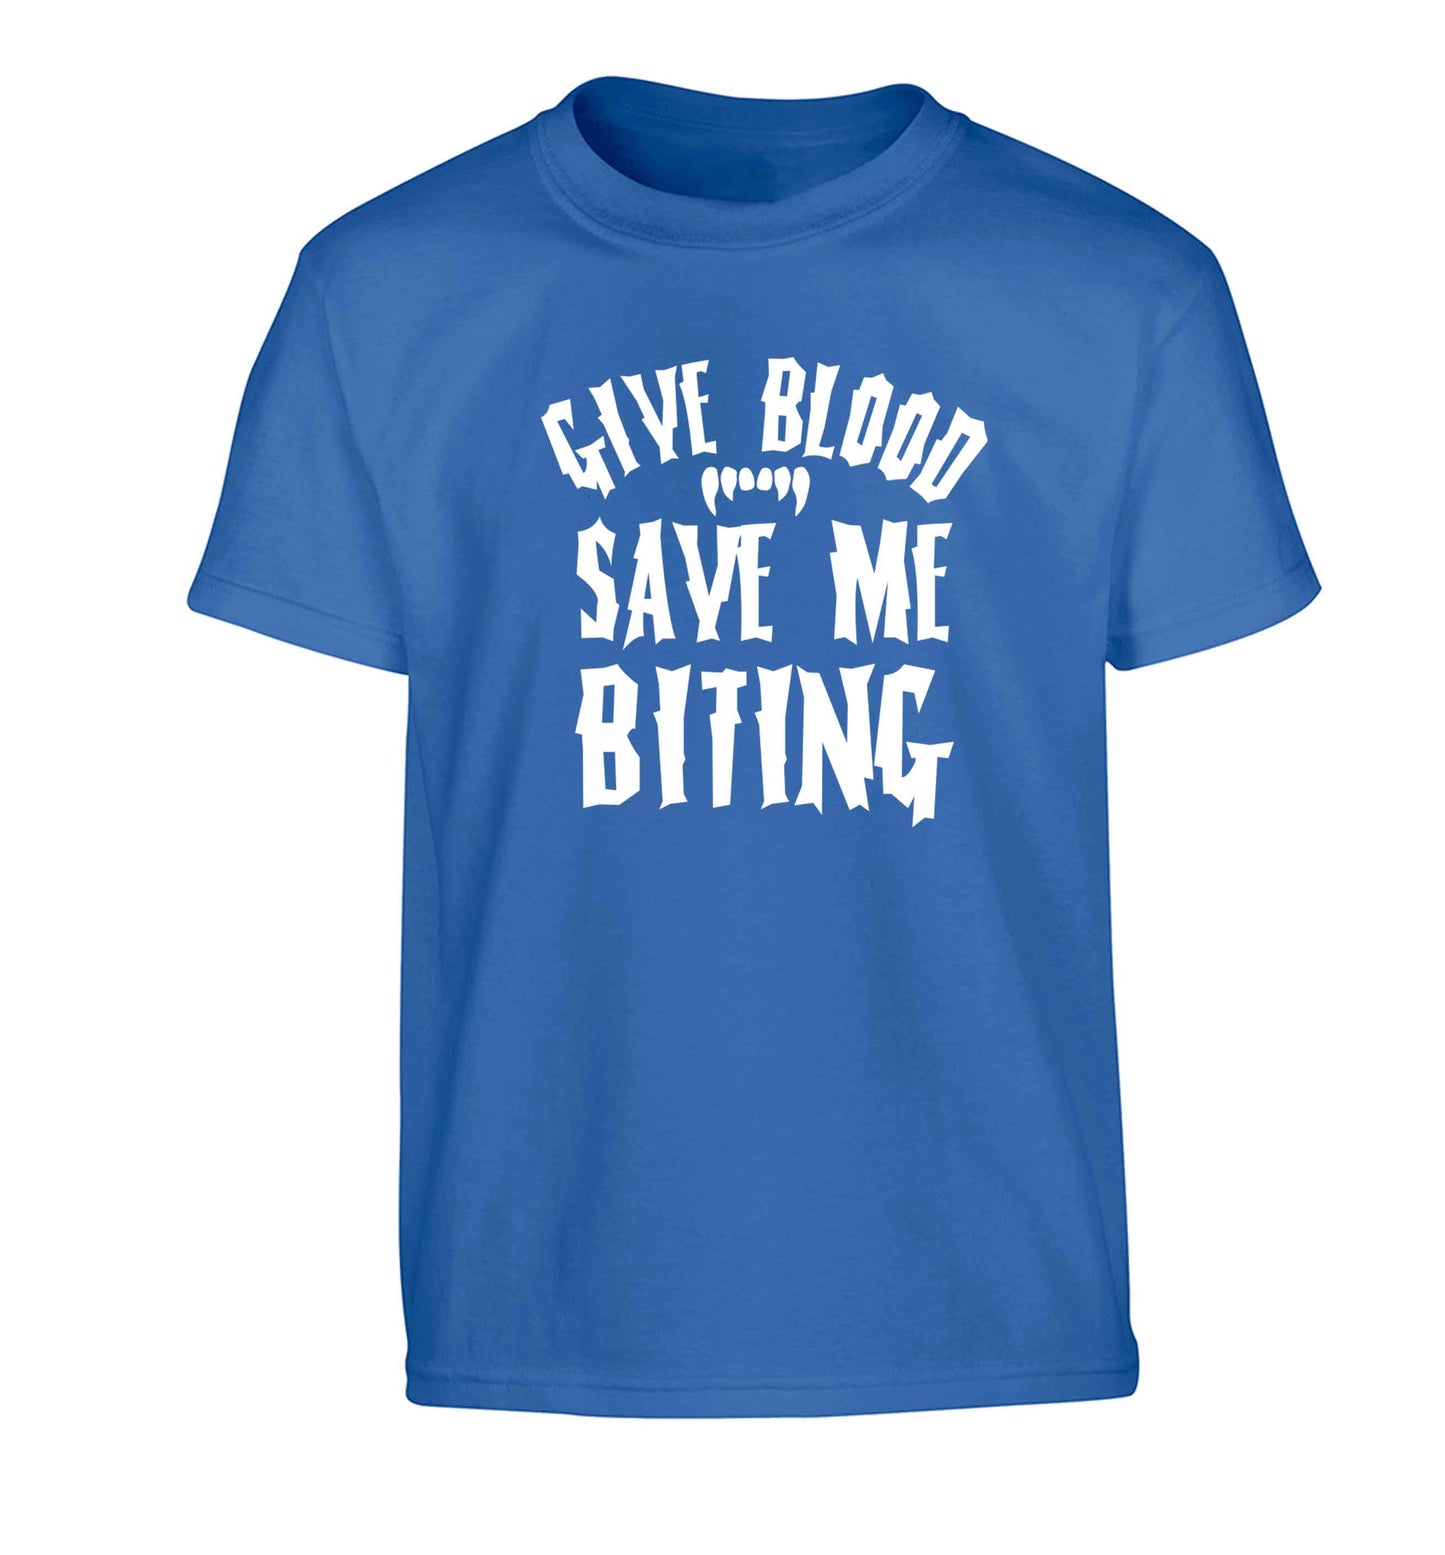 Give blood save me biting Children's blue Tshirt 12-13 Years